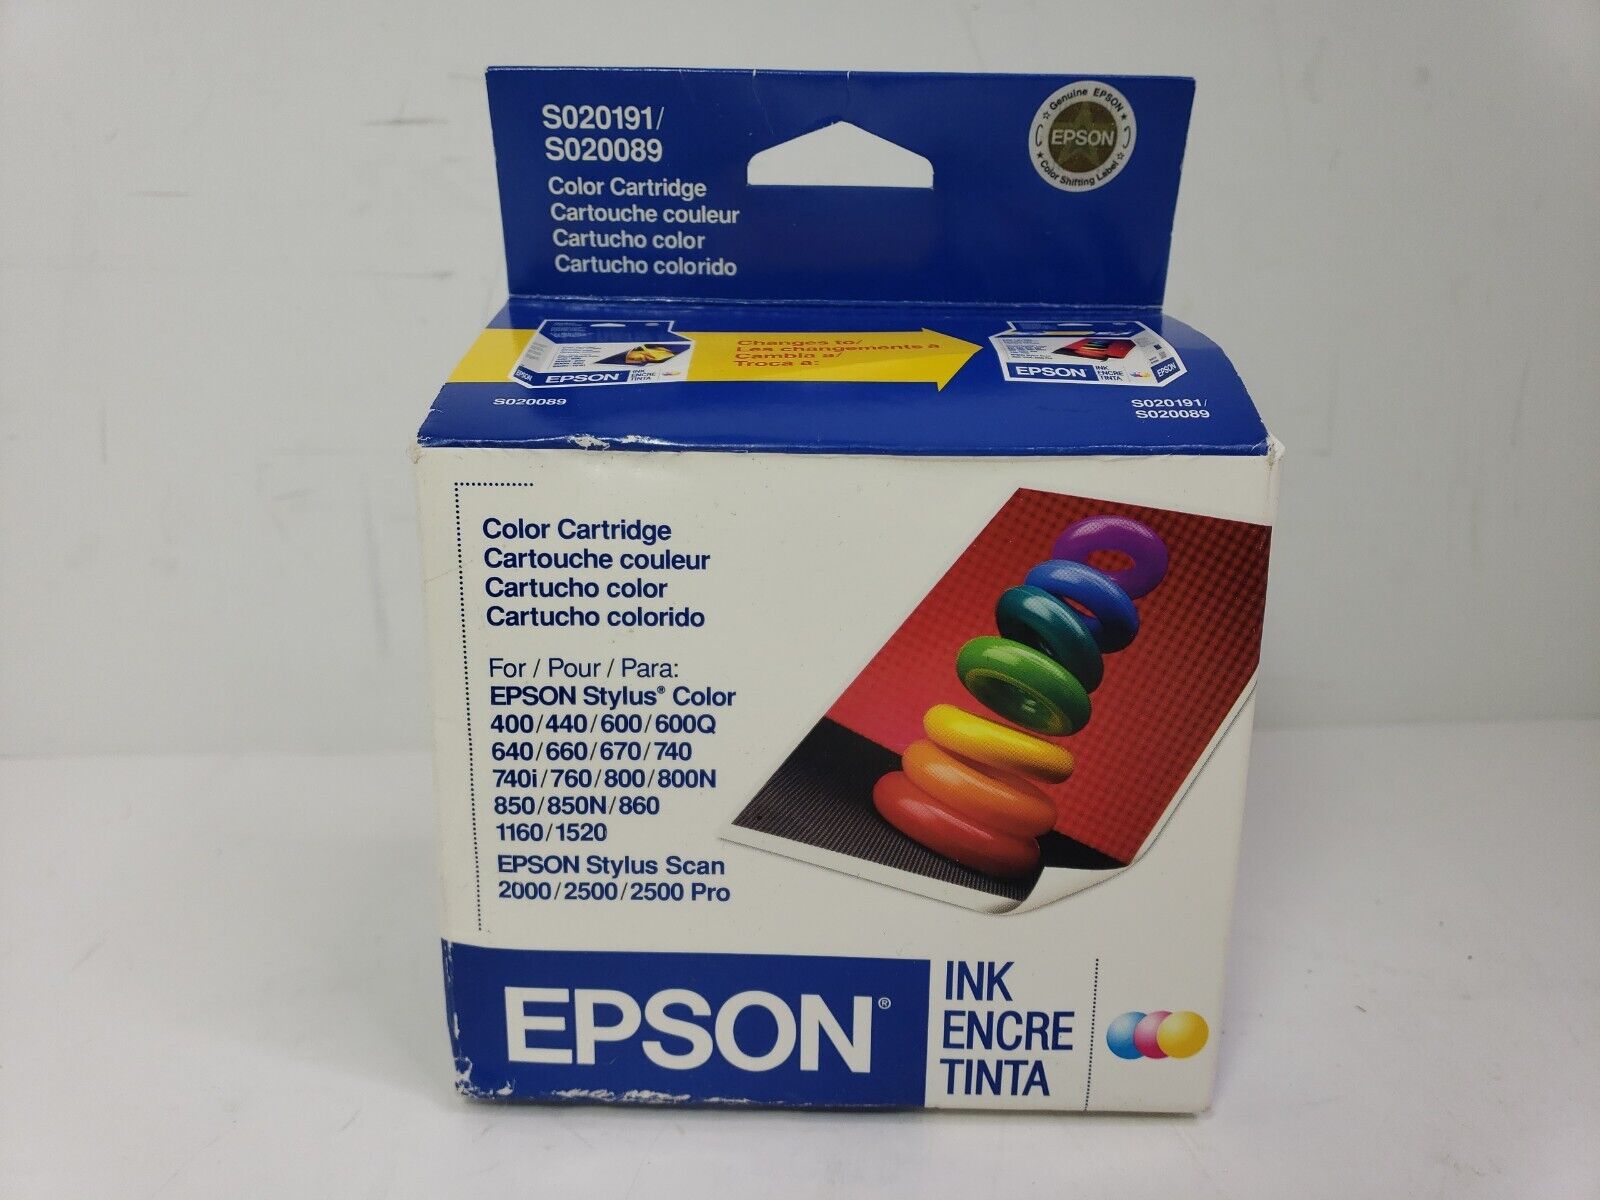 S020191 S191089 S020089 Genuine Epson Color Ink C87 Exp 05/2008